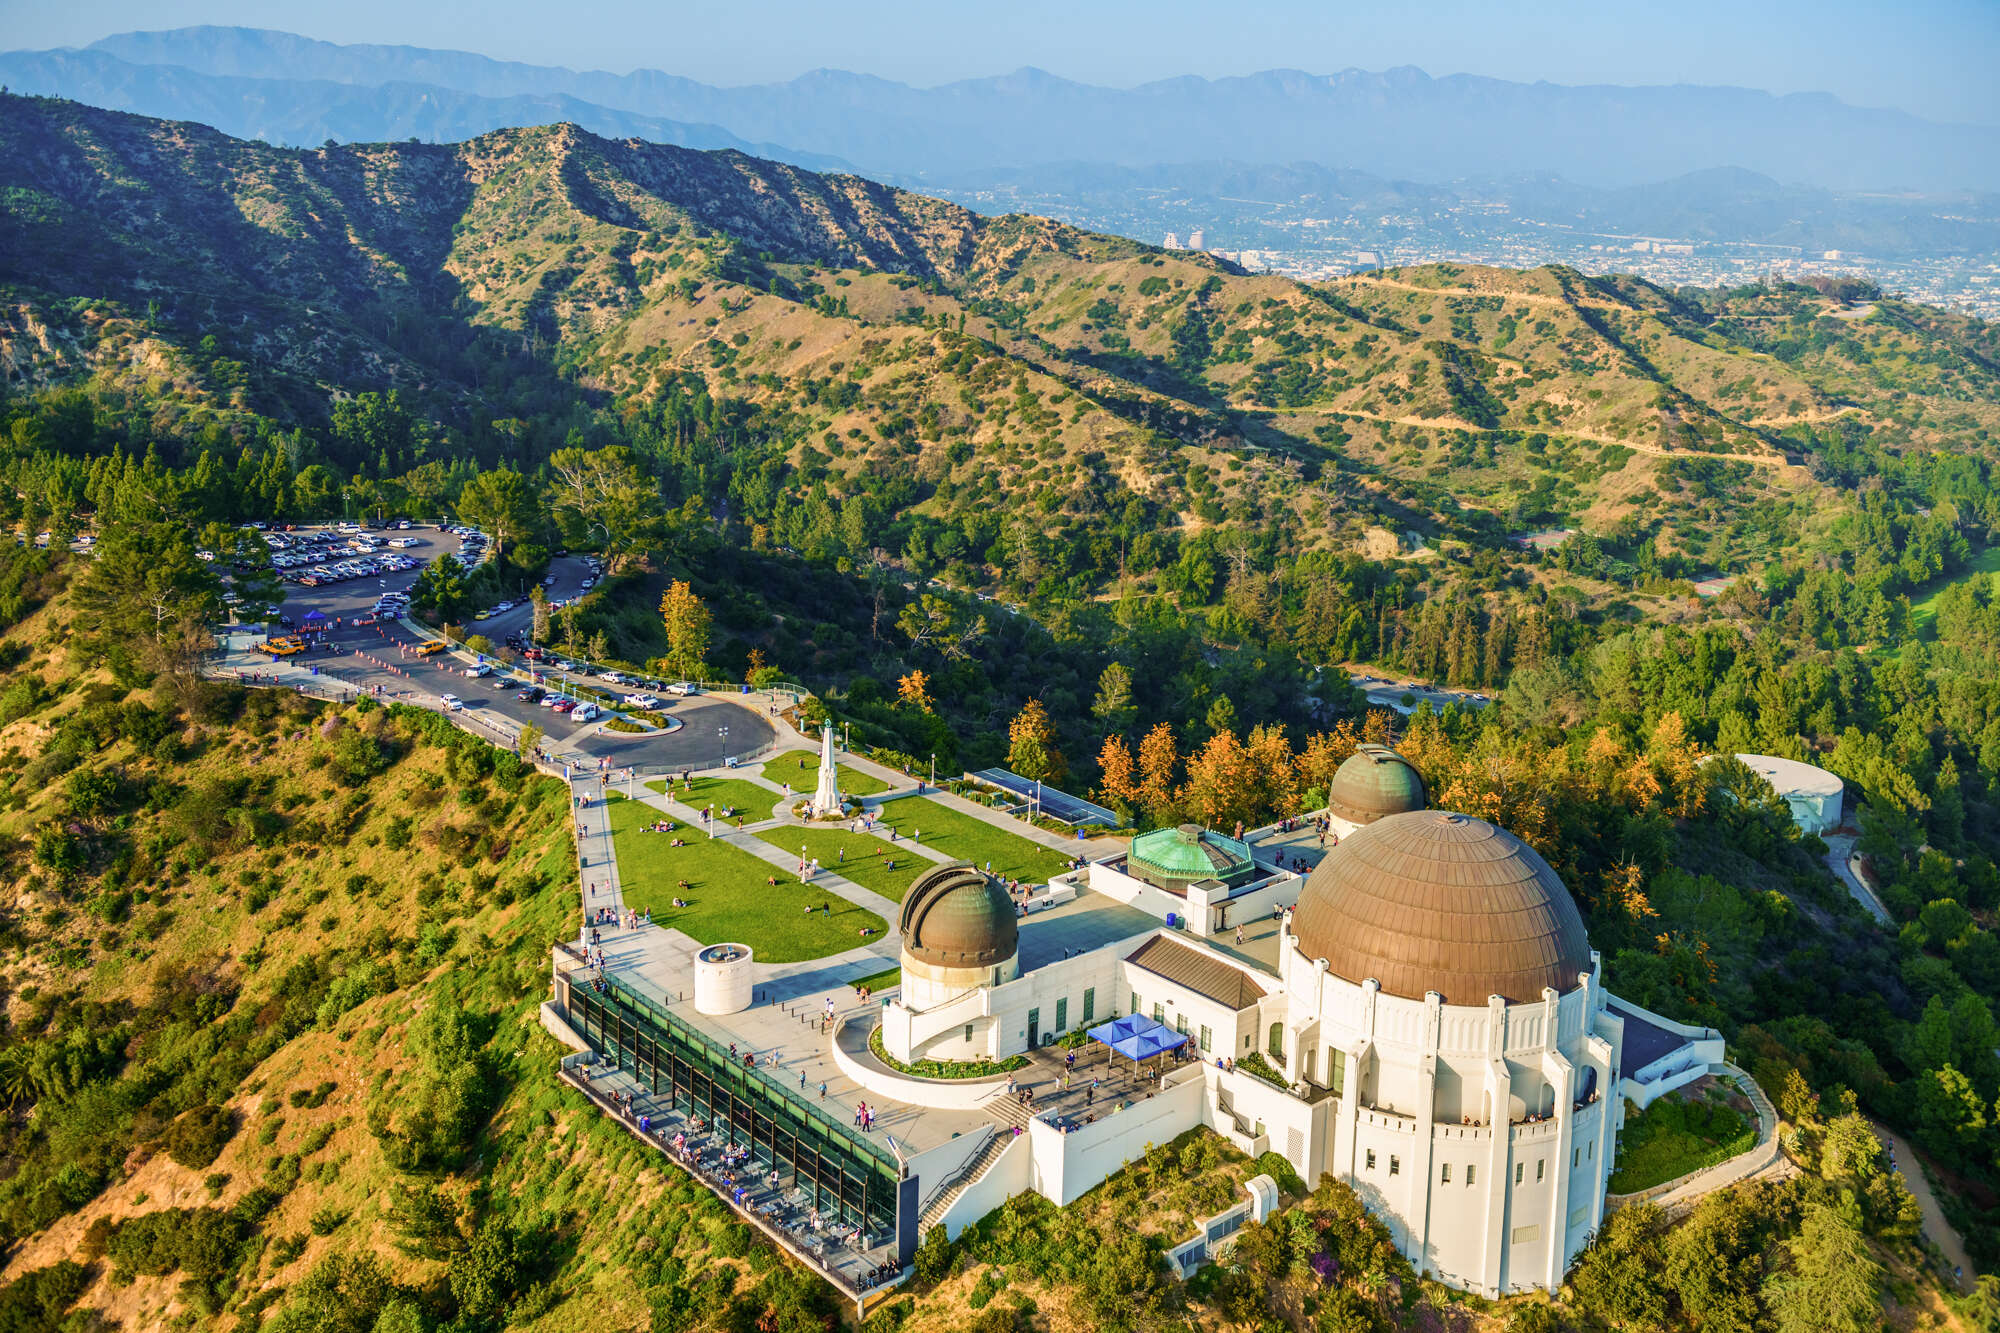 Griffith Observatory, Mount Hollywood, Los Angeles